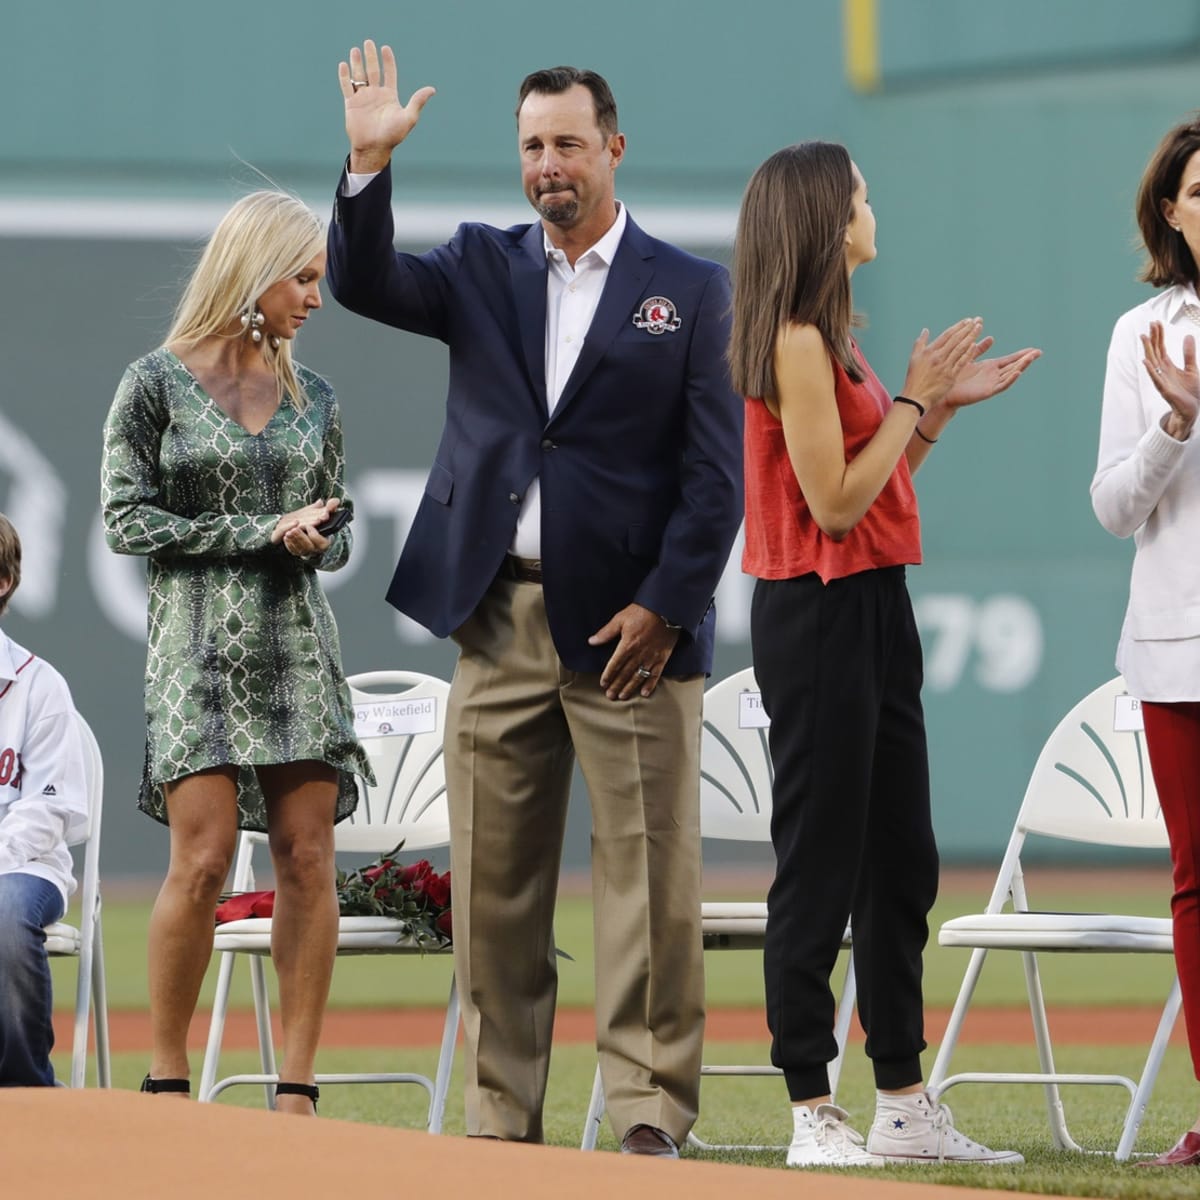 Beloved Red Sox pitcher Tim Wakefield dies at age 57 after